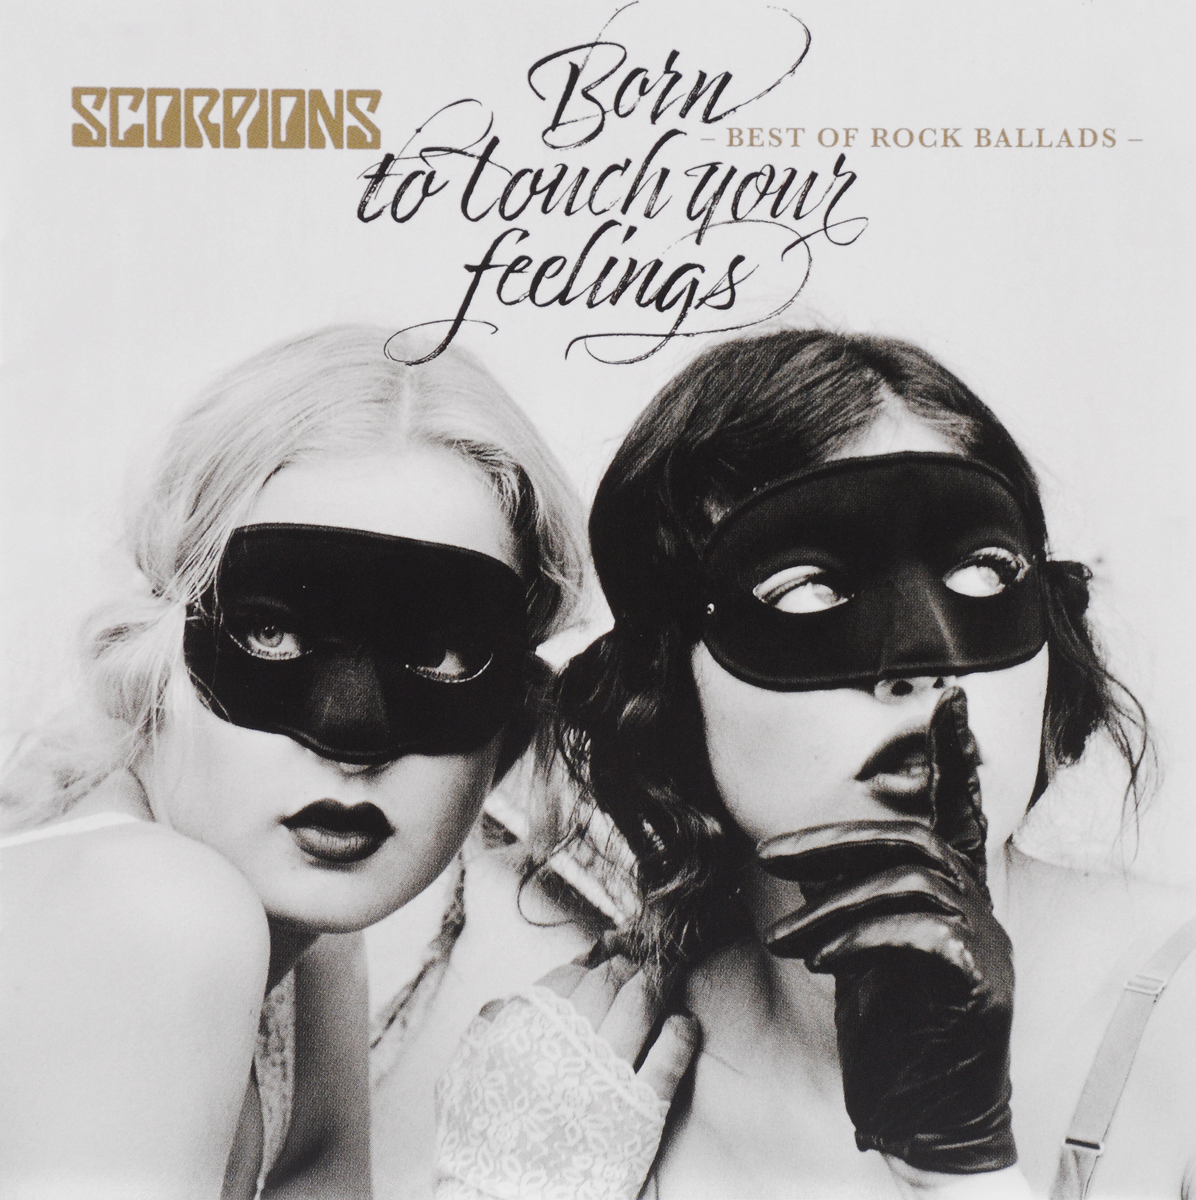 Scorpions. Born To Touch Your Feelings. Best Of Rock Ballads